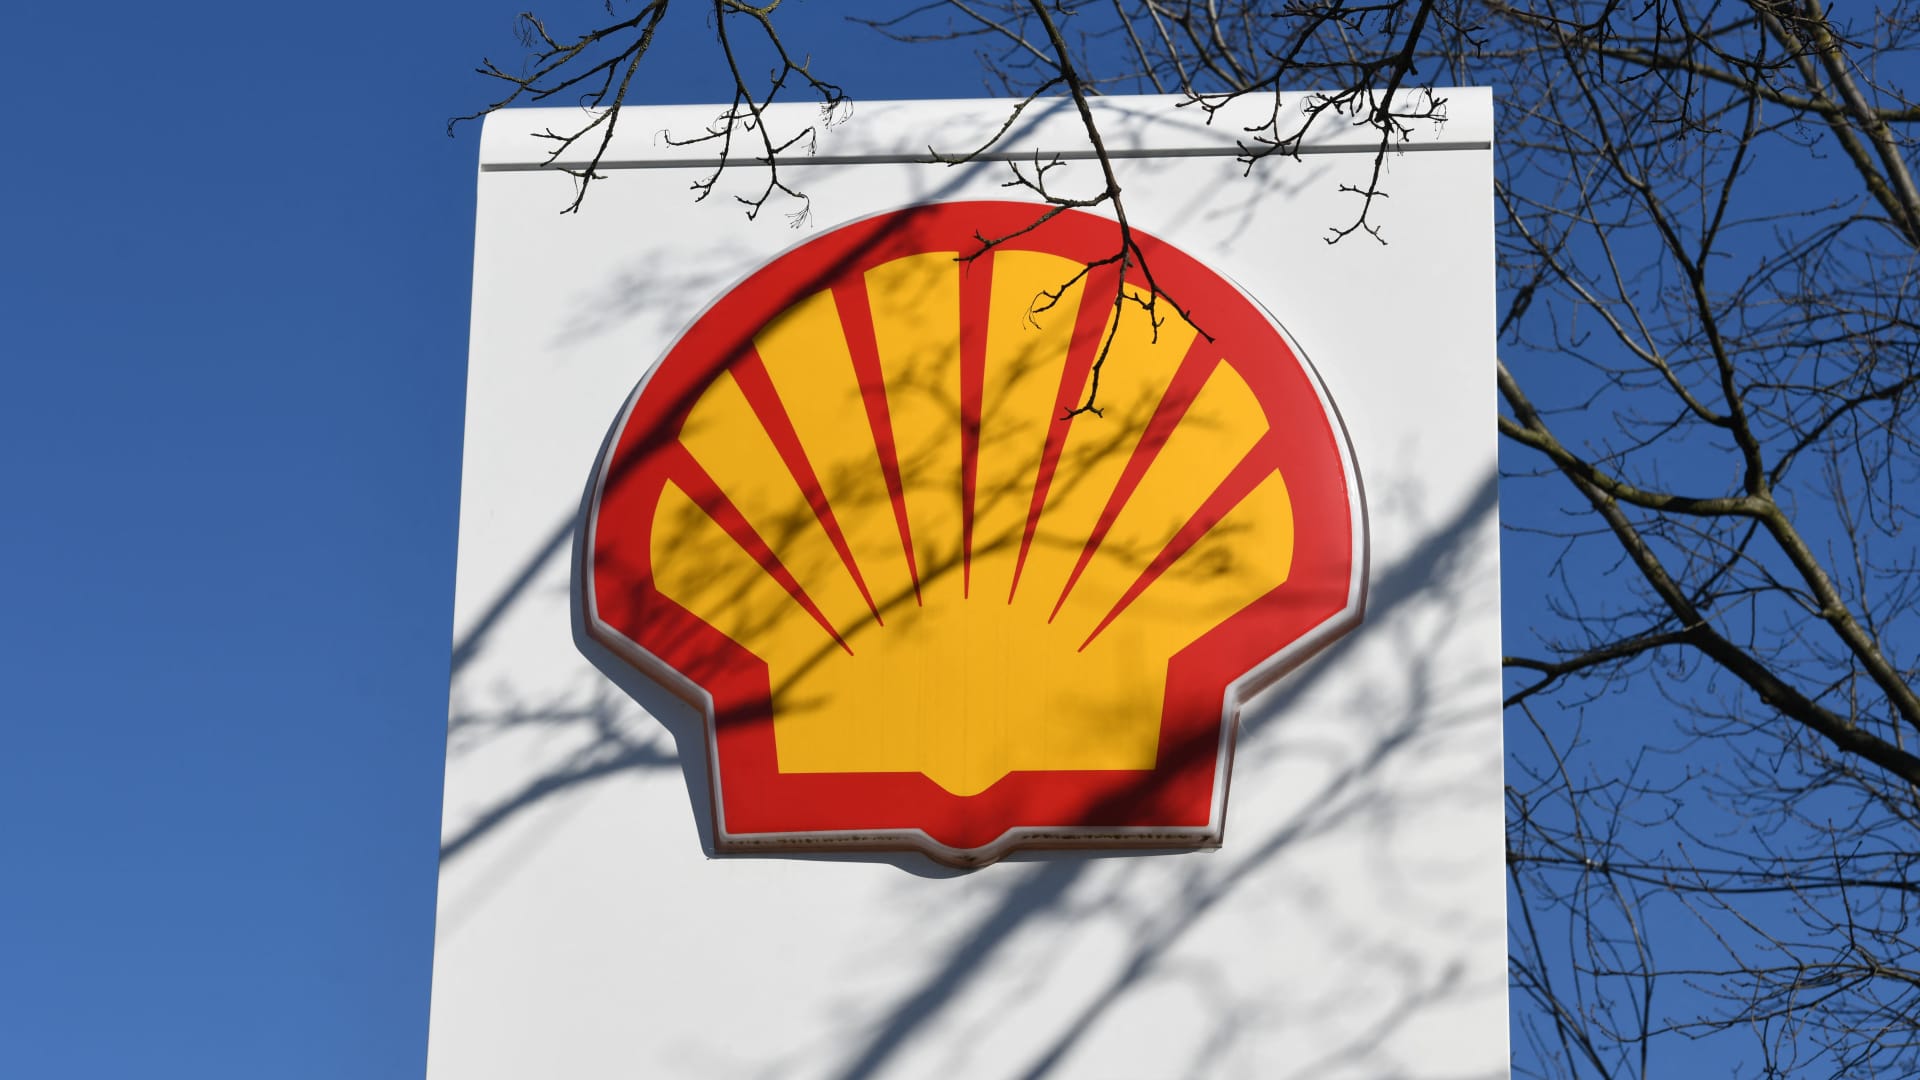 Shell to build Europe’s ‘largest’ renewable hydrogen plant to help power Dutch refinery